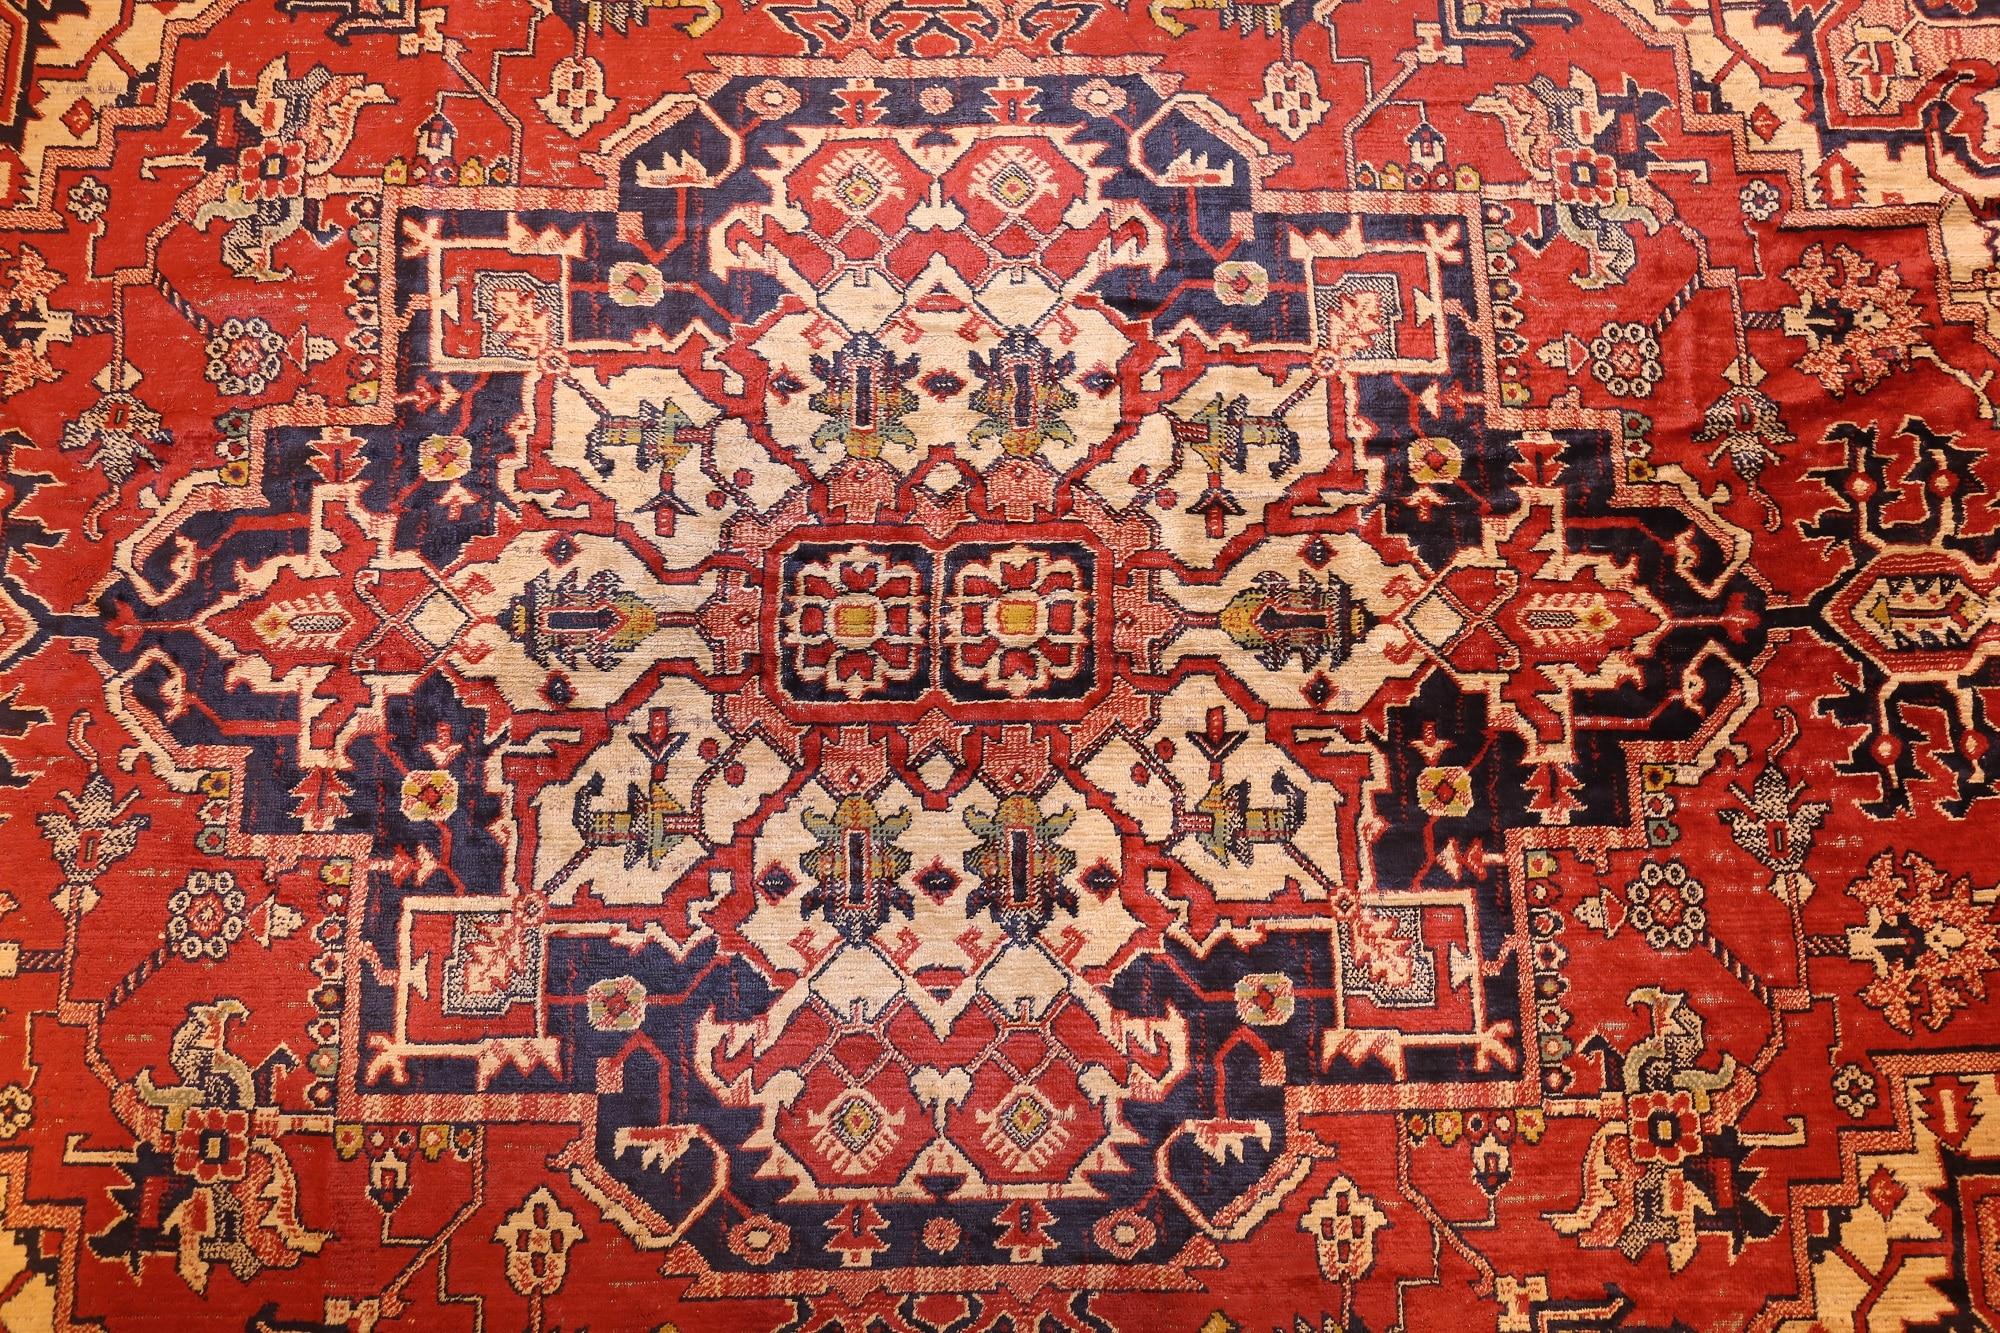 20th Century Antique American Chenille Rug. Size: 4 ft 7 in x 6 ft (1.4 m x 1.83 m)